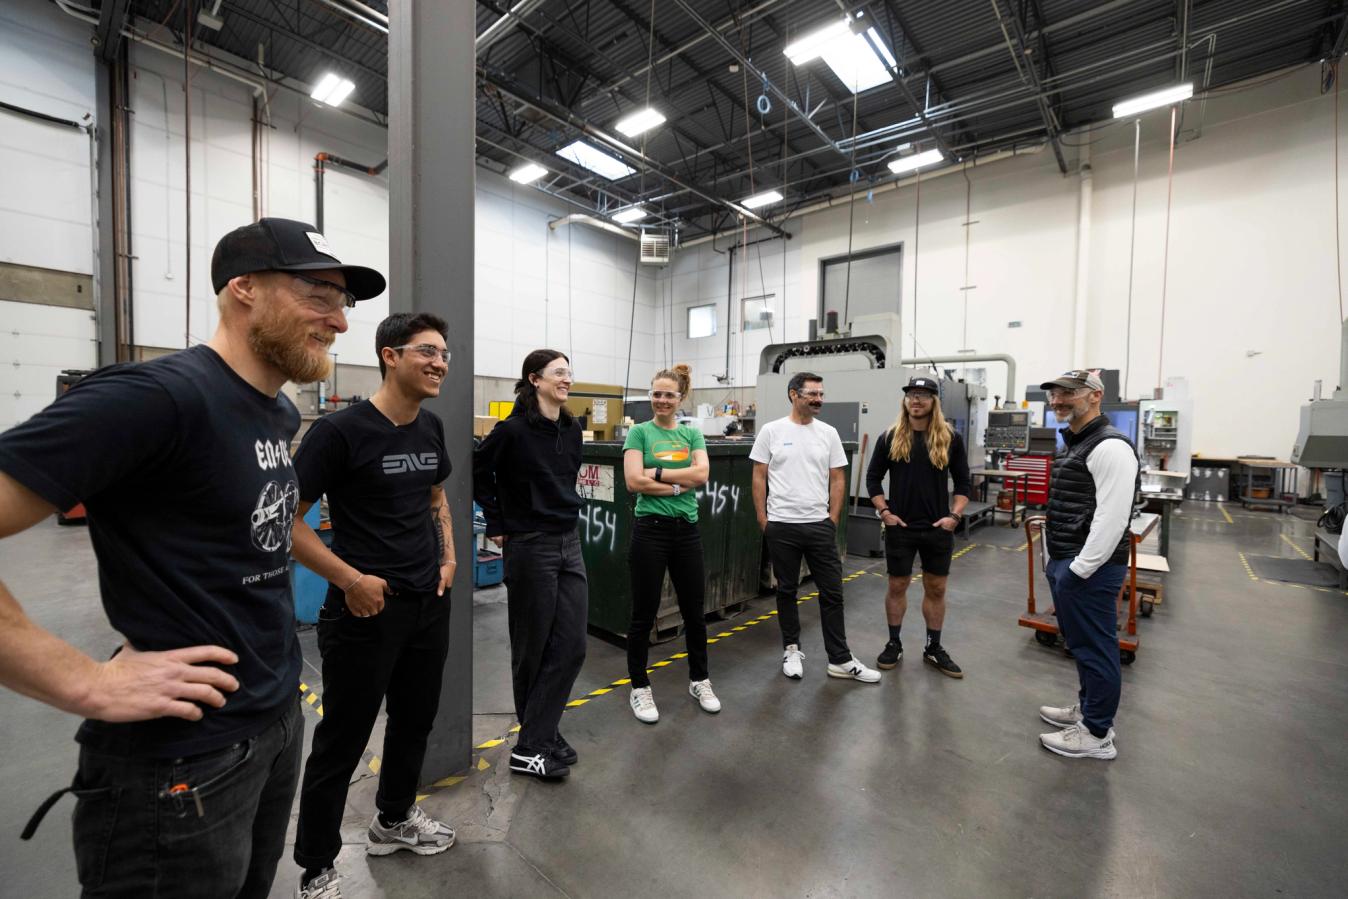 Part of the launch for the project was a tour of ENVE's headquarters in Ogden, Utah